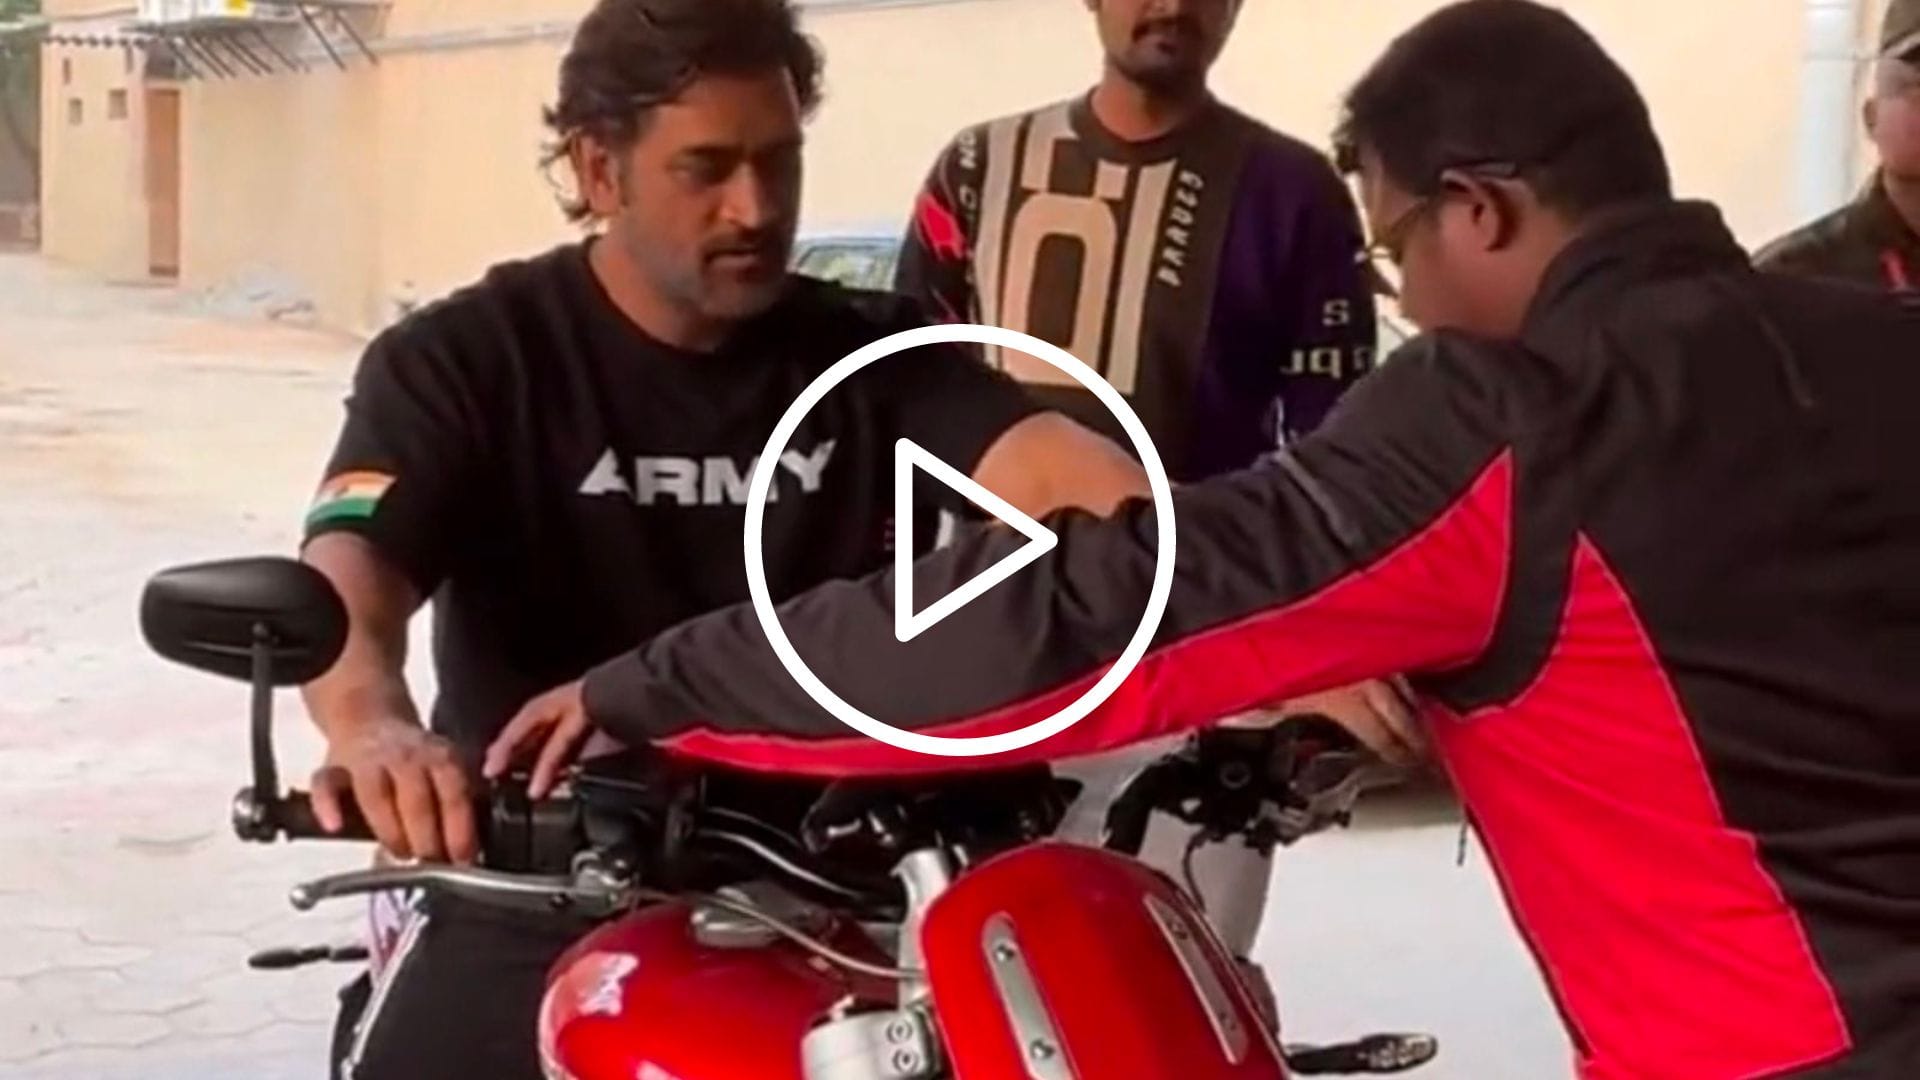 [Watch] MS Dhoni Reinforces Love For Bikes During Holiday